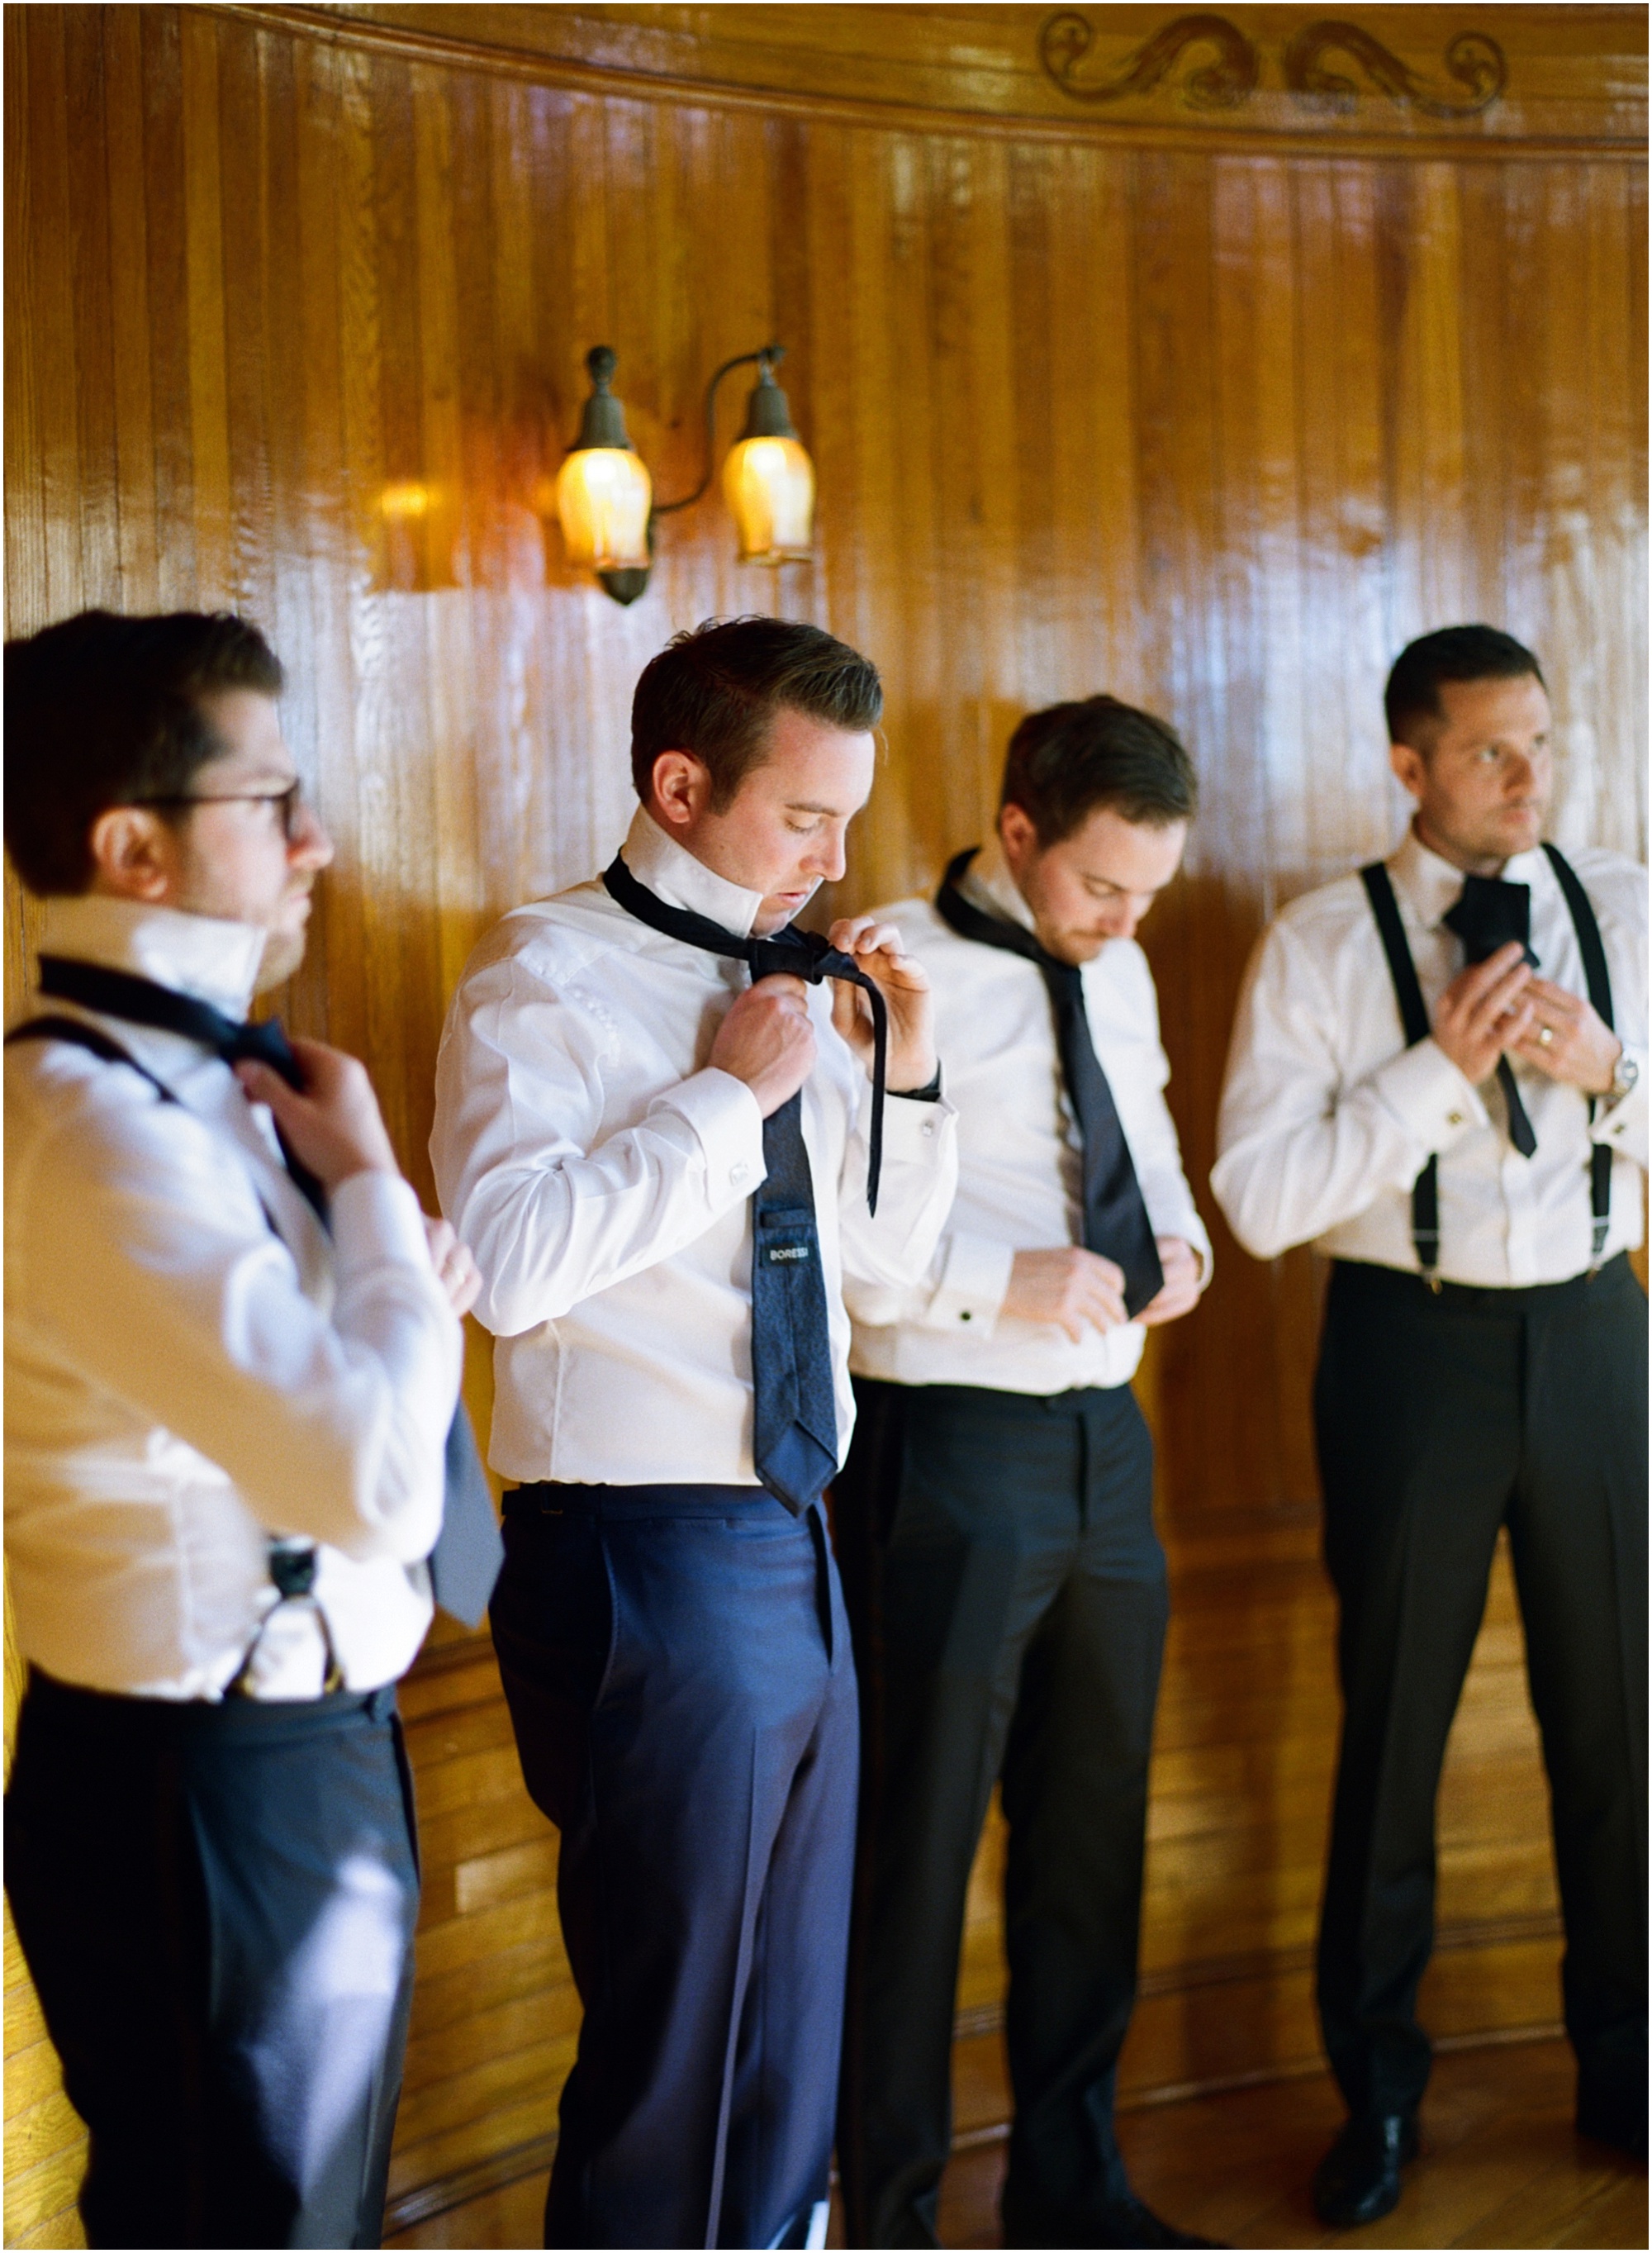 Wedding Photography at The Powel Crosley Estate in Sarasota, Florida, Guys getting ready in the ship room